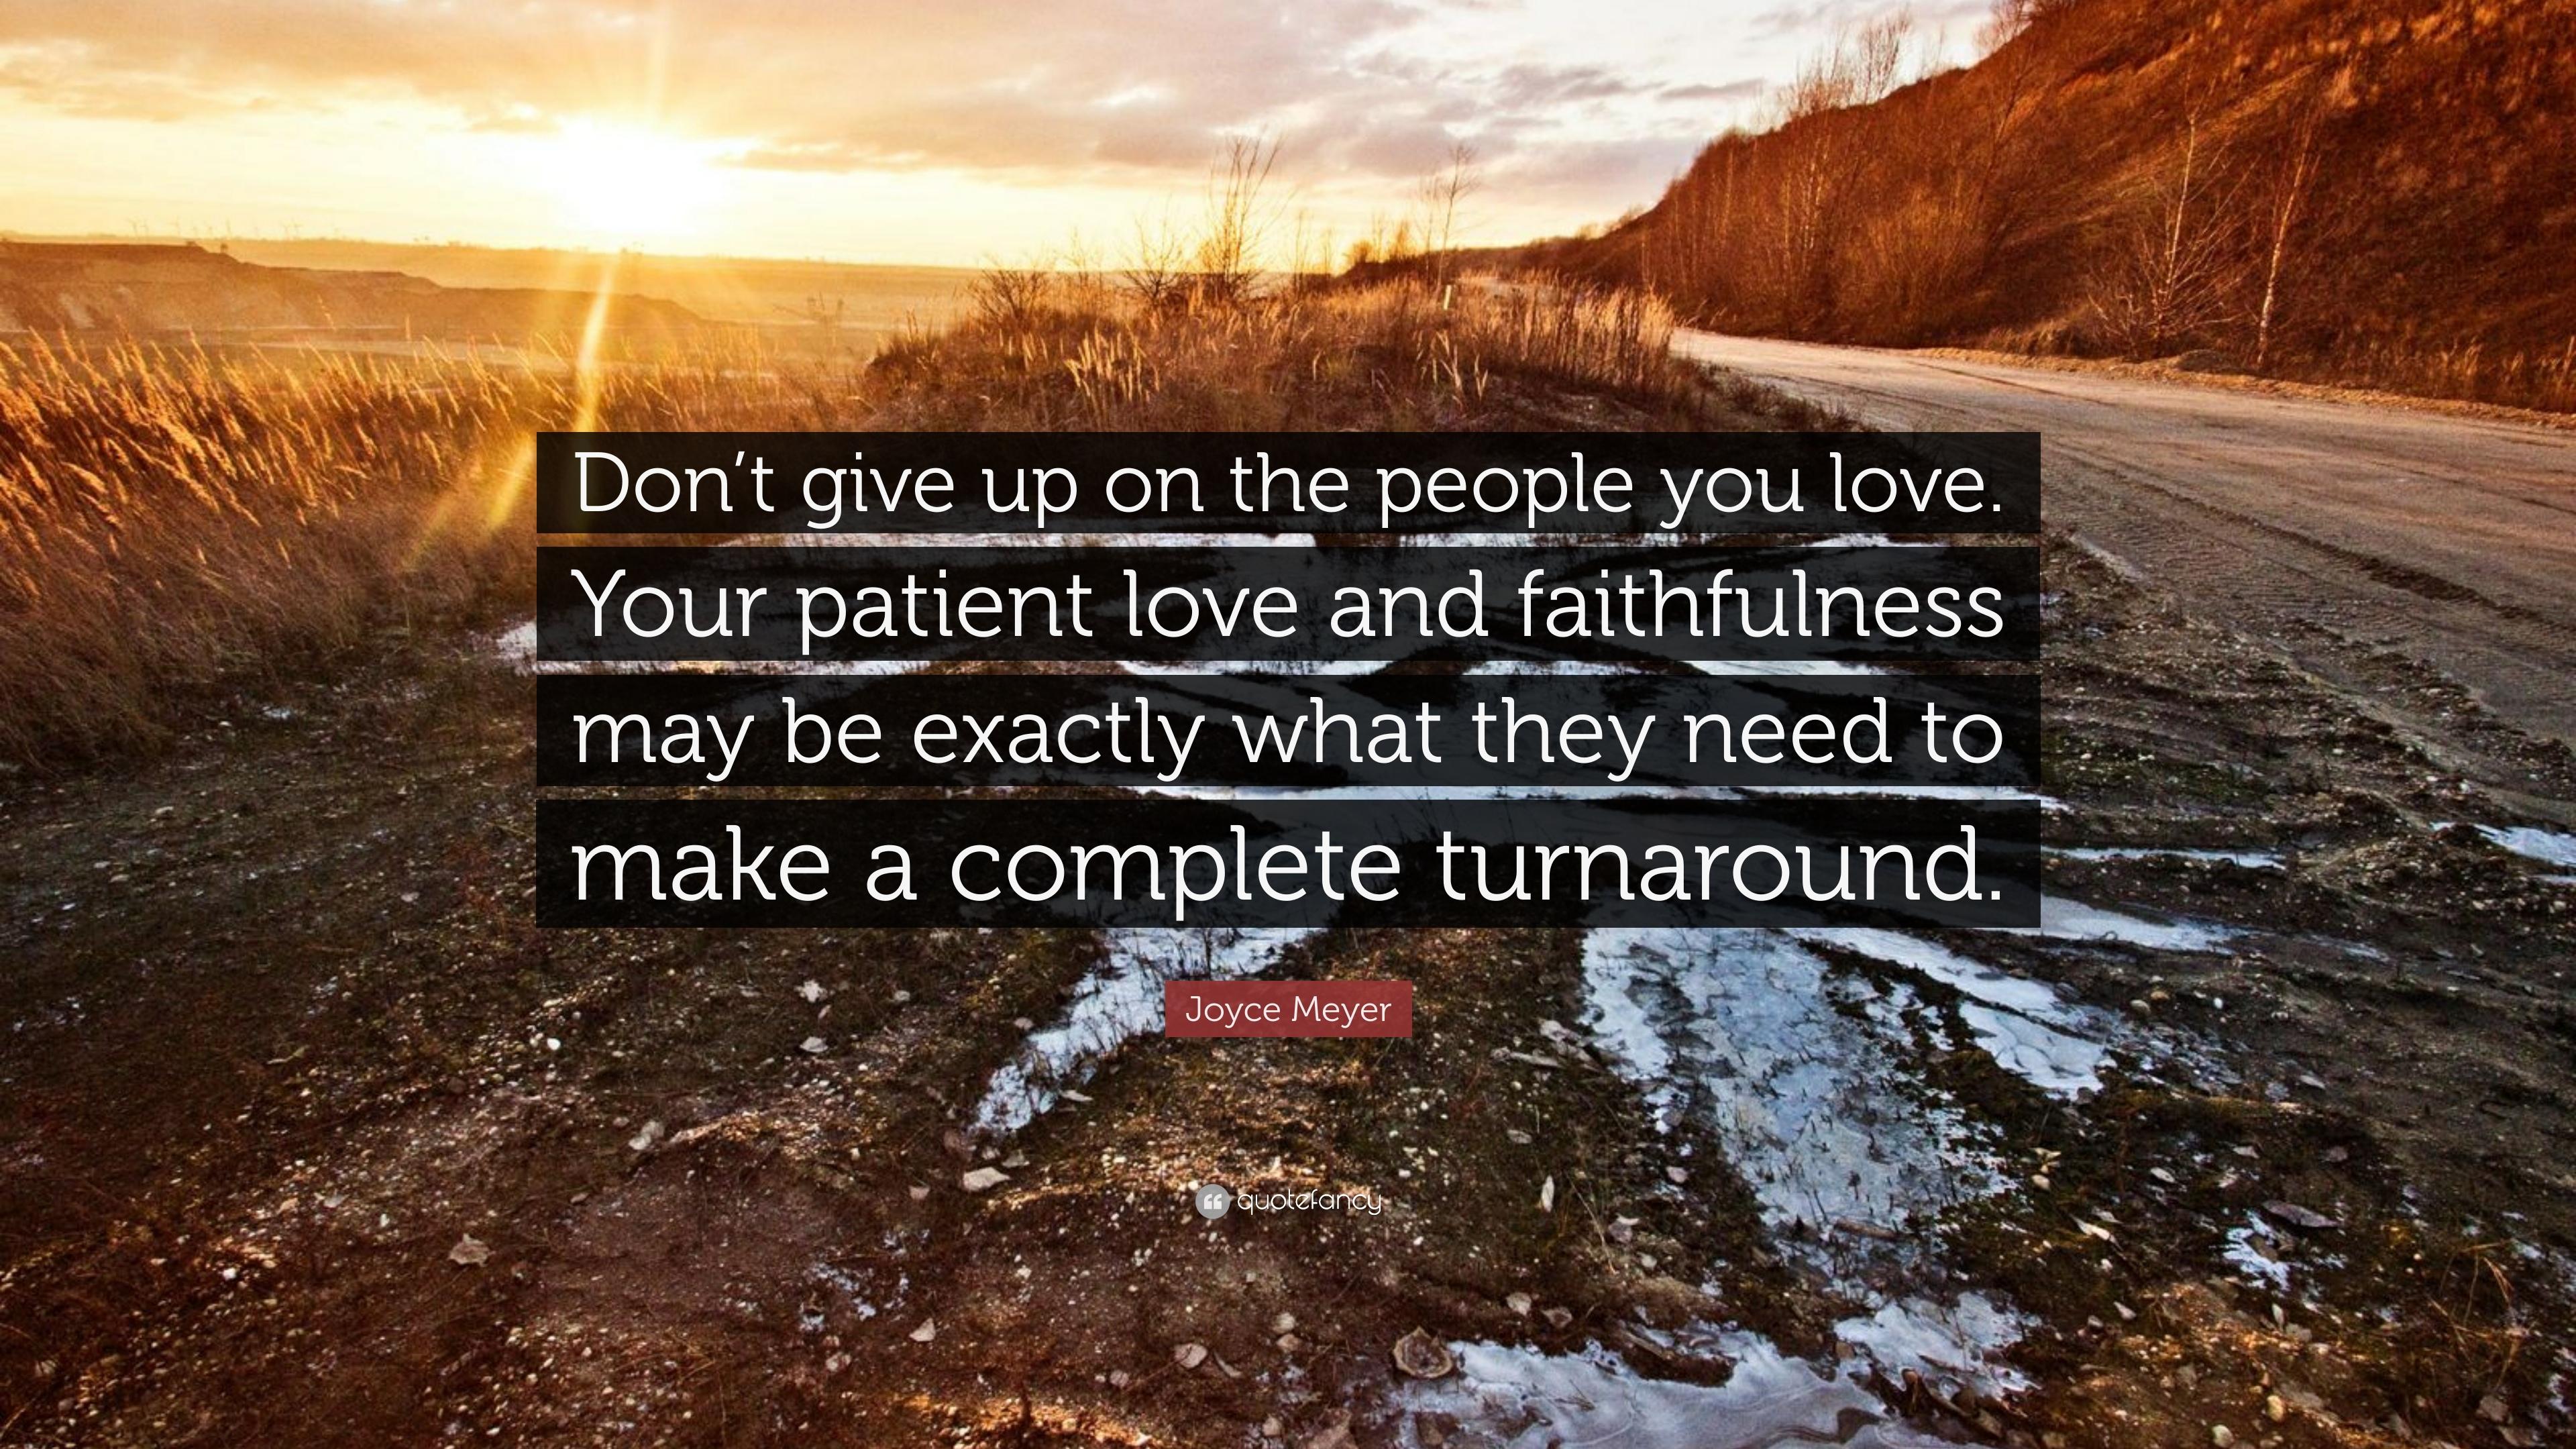 Joyce Meyer Quote: “Don't give up on the people you love. Your